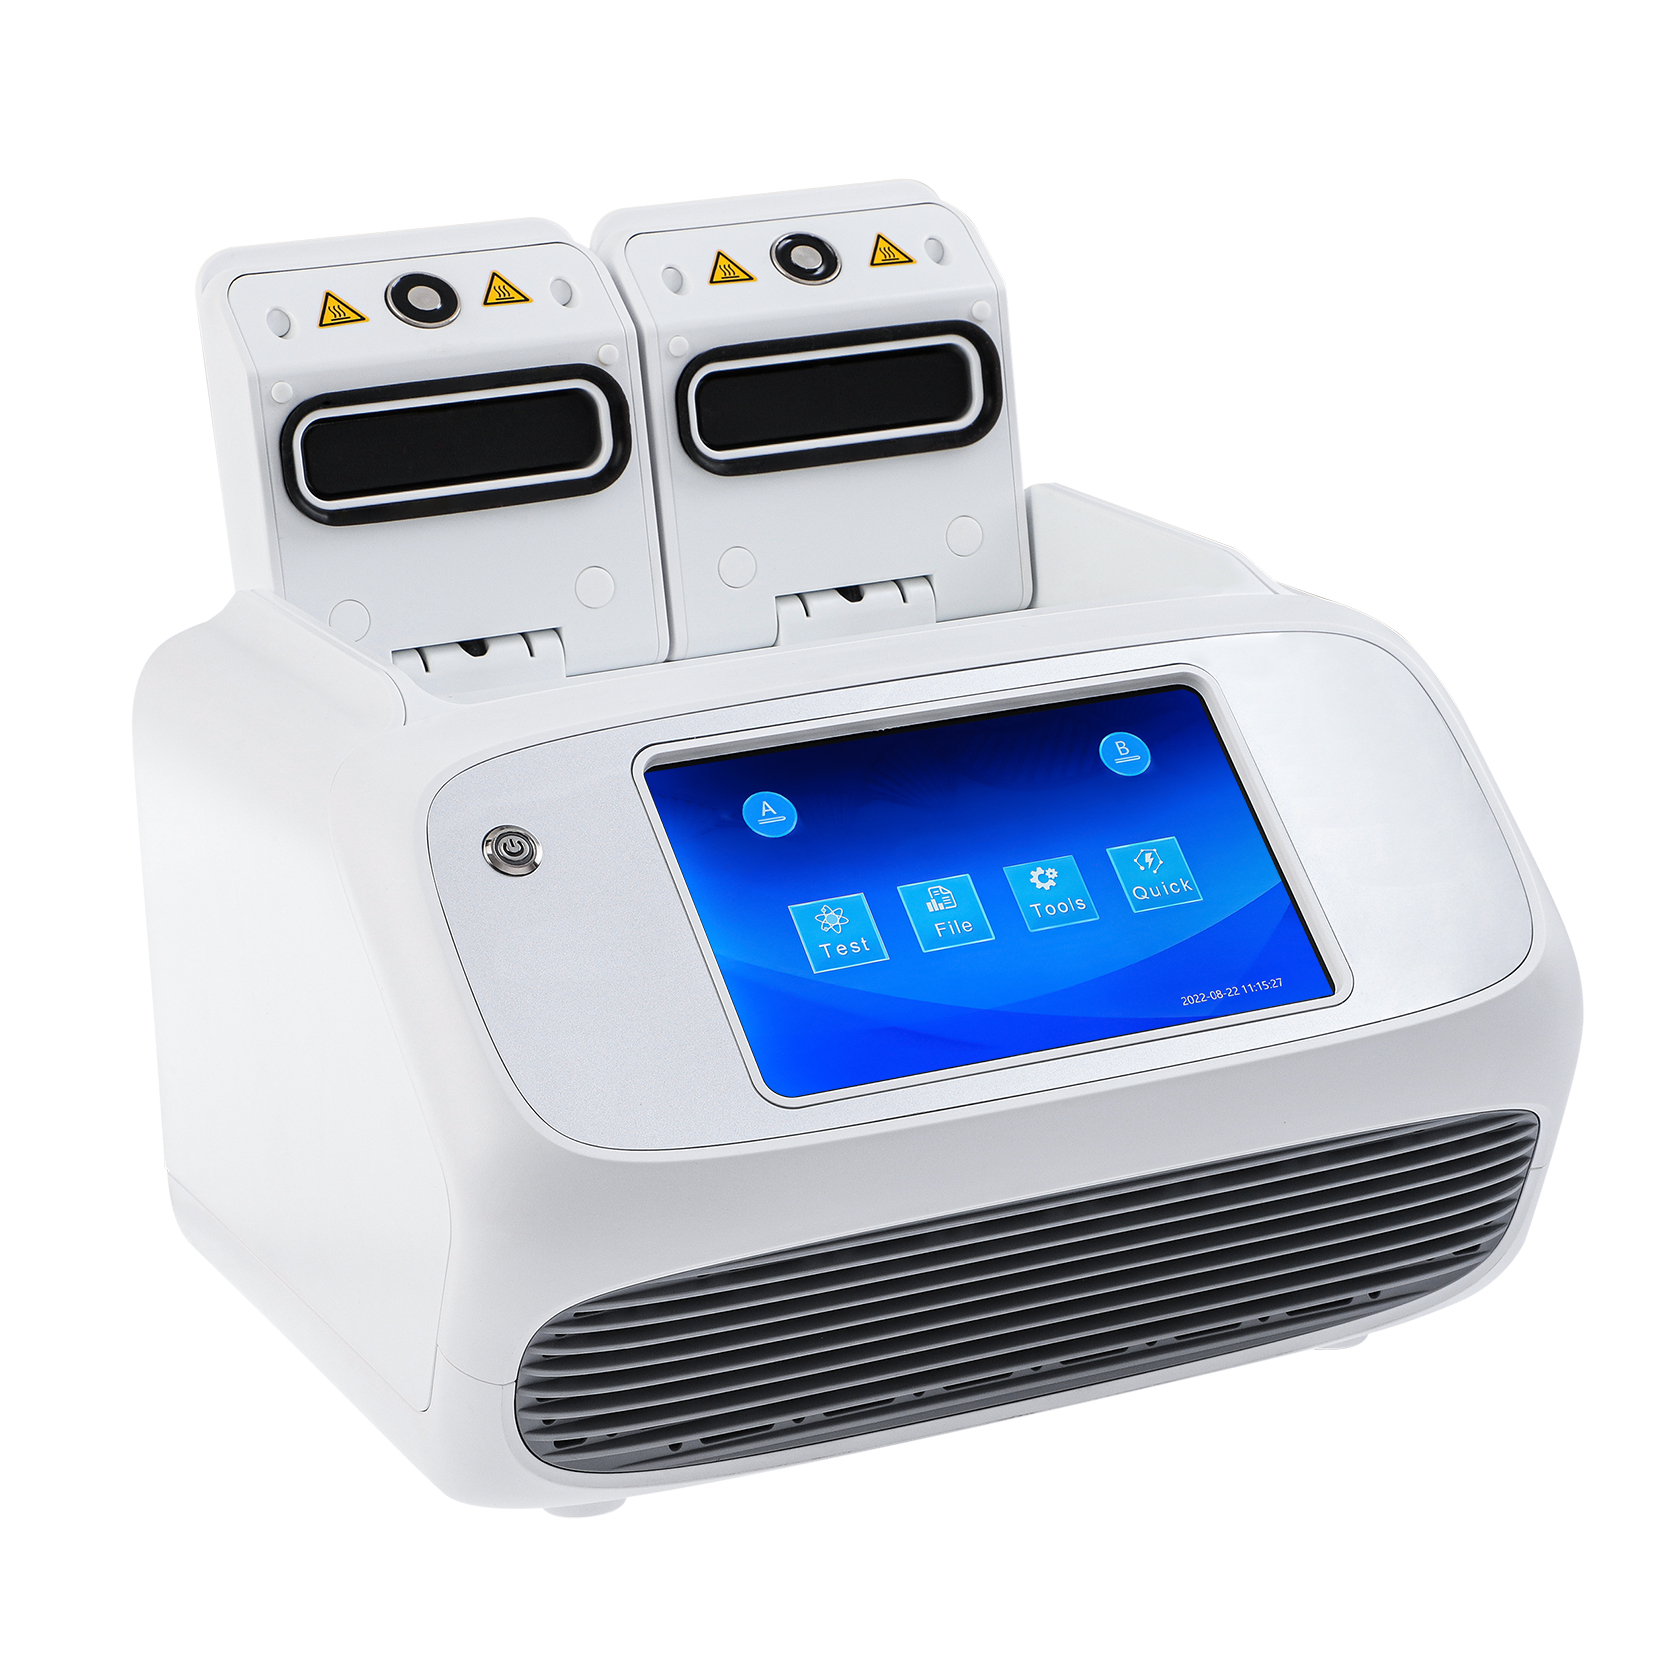 Real-Time PCR S1604 (16-well)